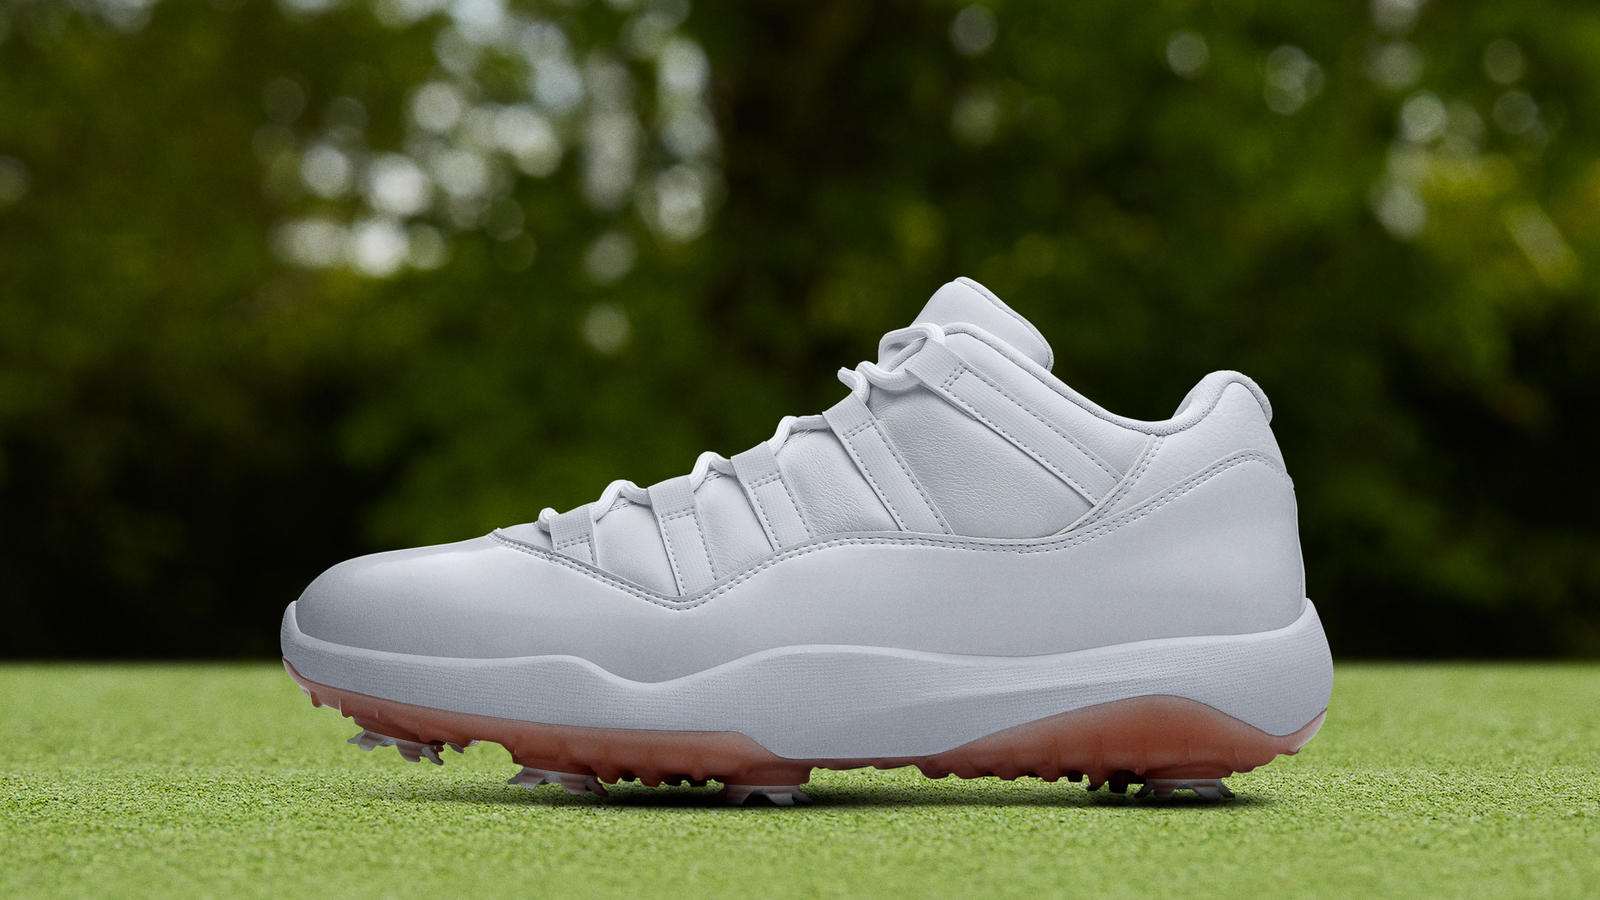 Nike Golf Releasing Another New Air Jordan 11 Low In A White And Gold